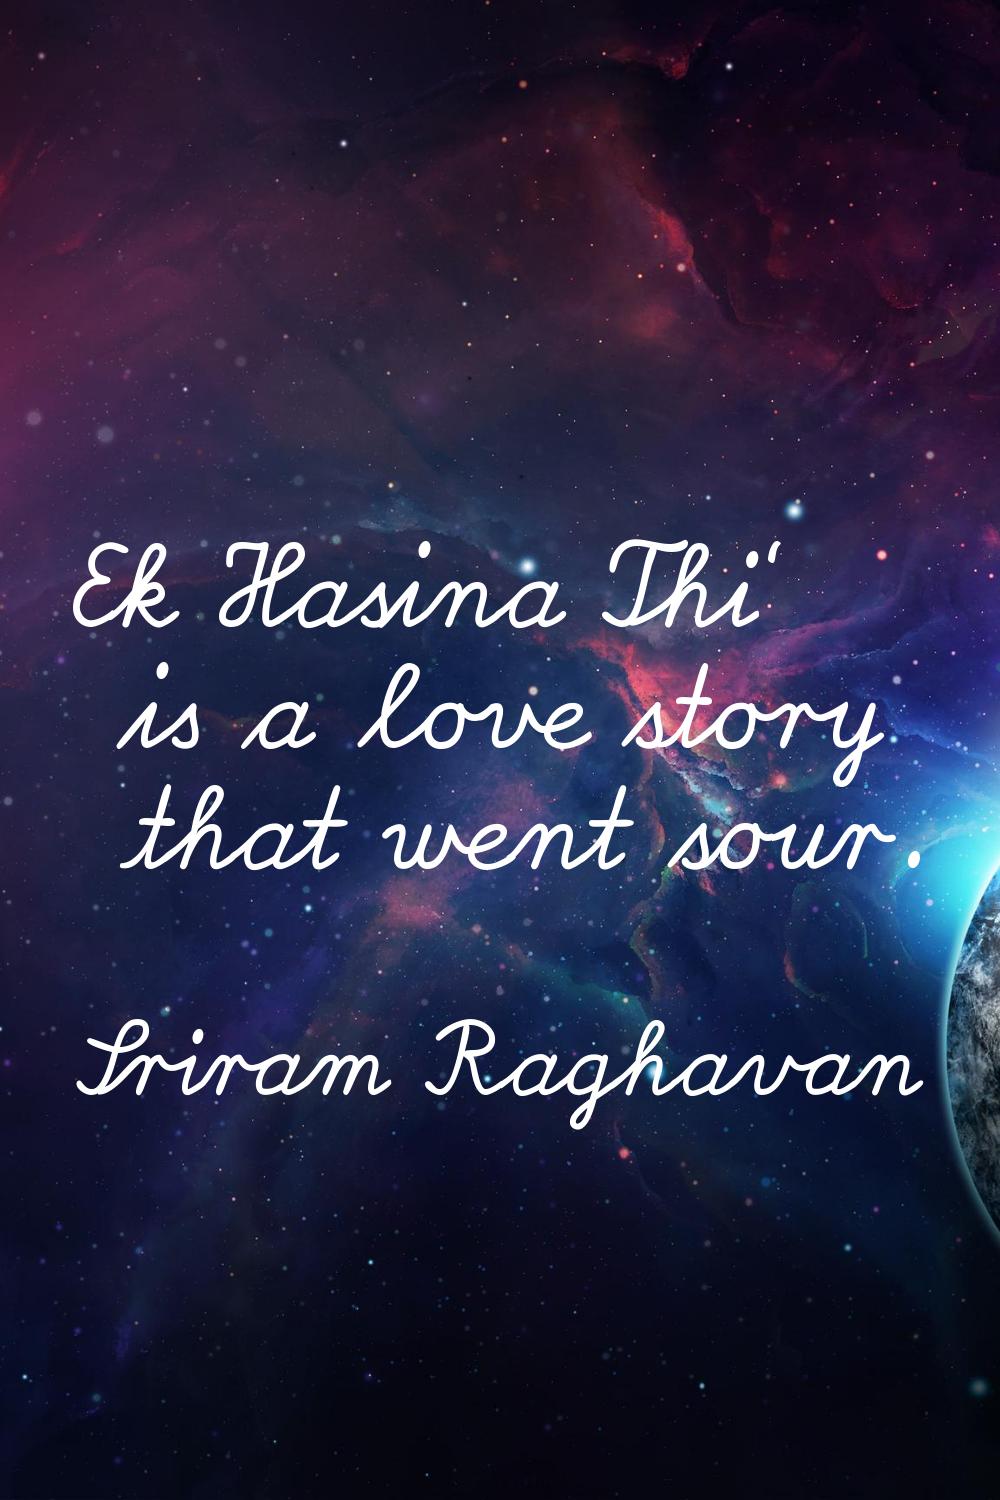 Ek Hasina Thi' is a love story that went sour.